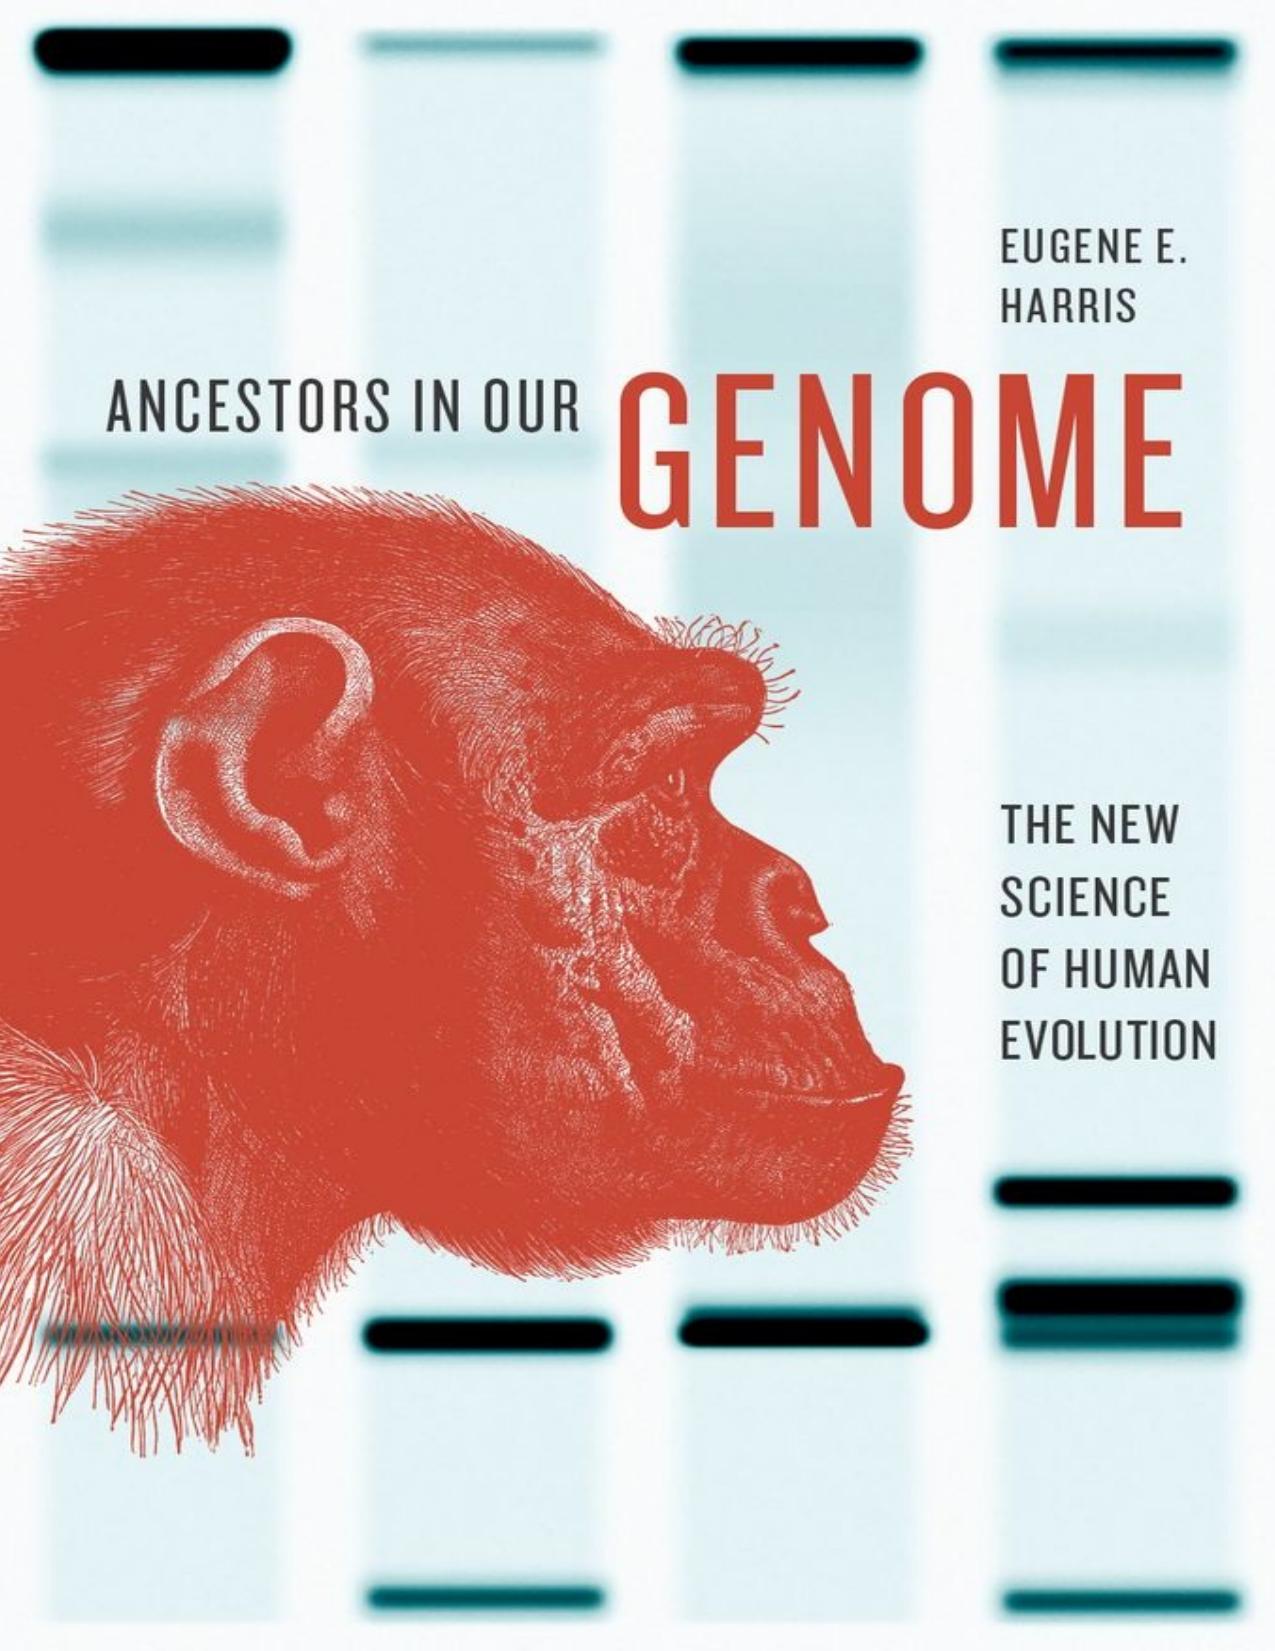 Ancestors in Our Genome: The New Science of Human Evolution - PDFDrive.com